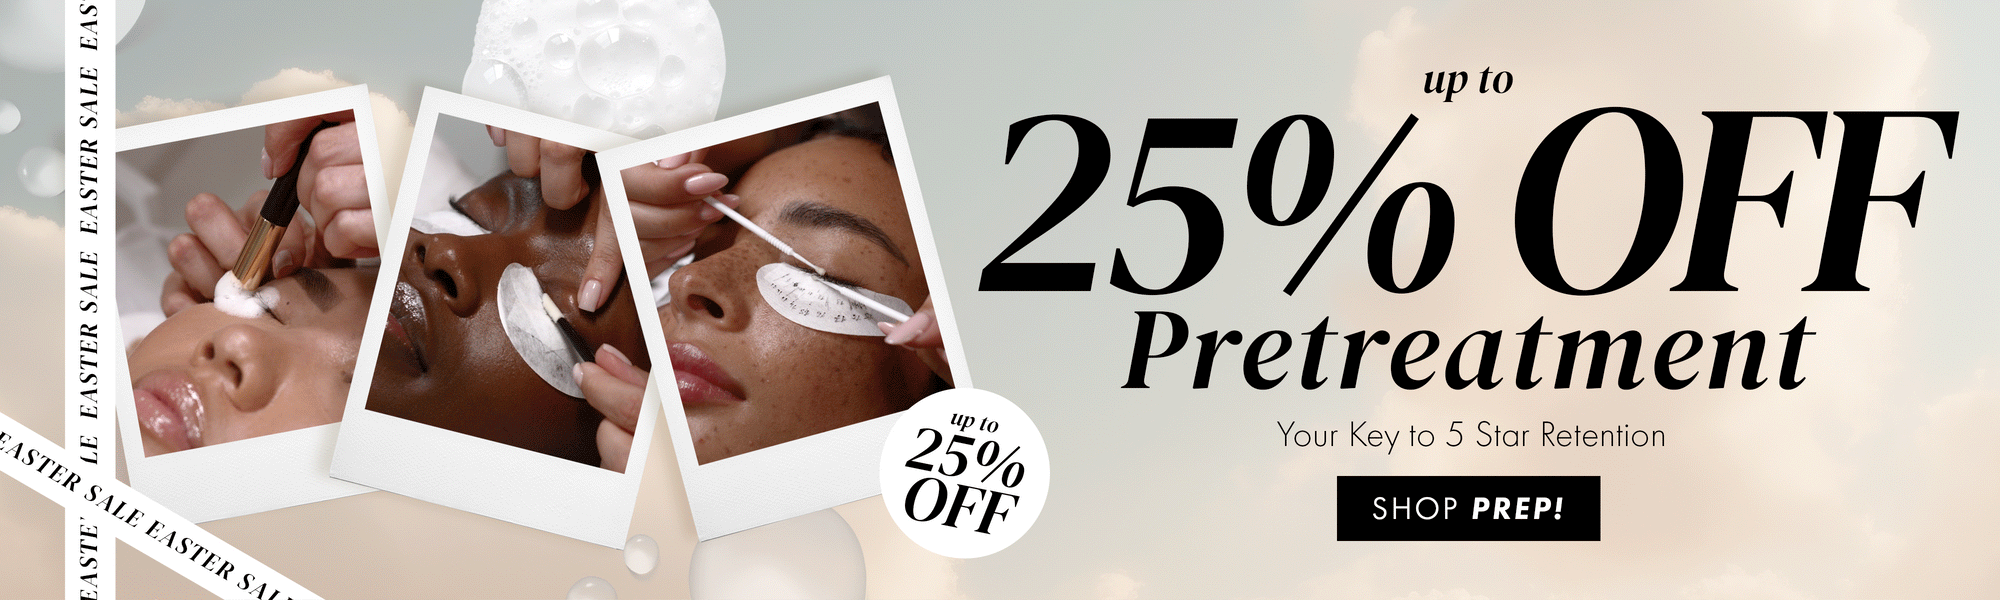 Up to 25% off Pretreatment